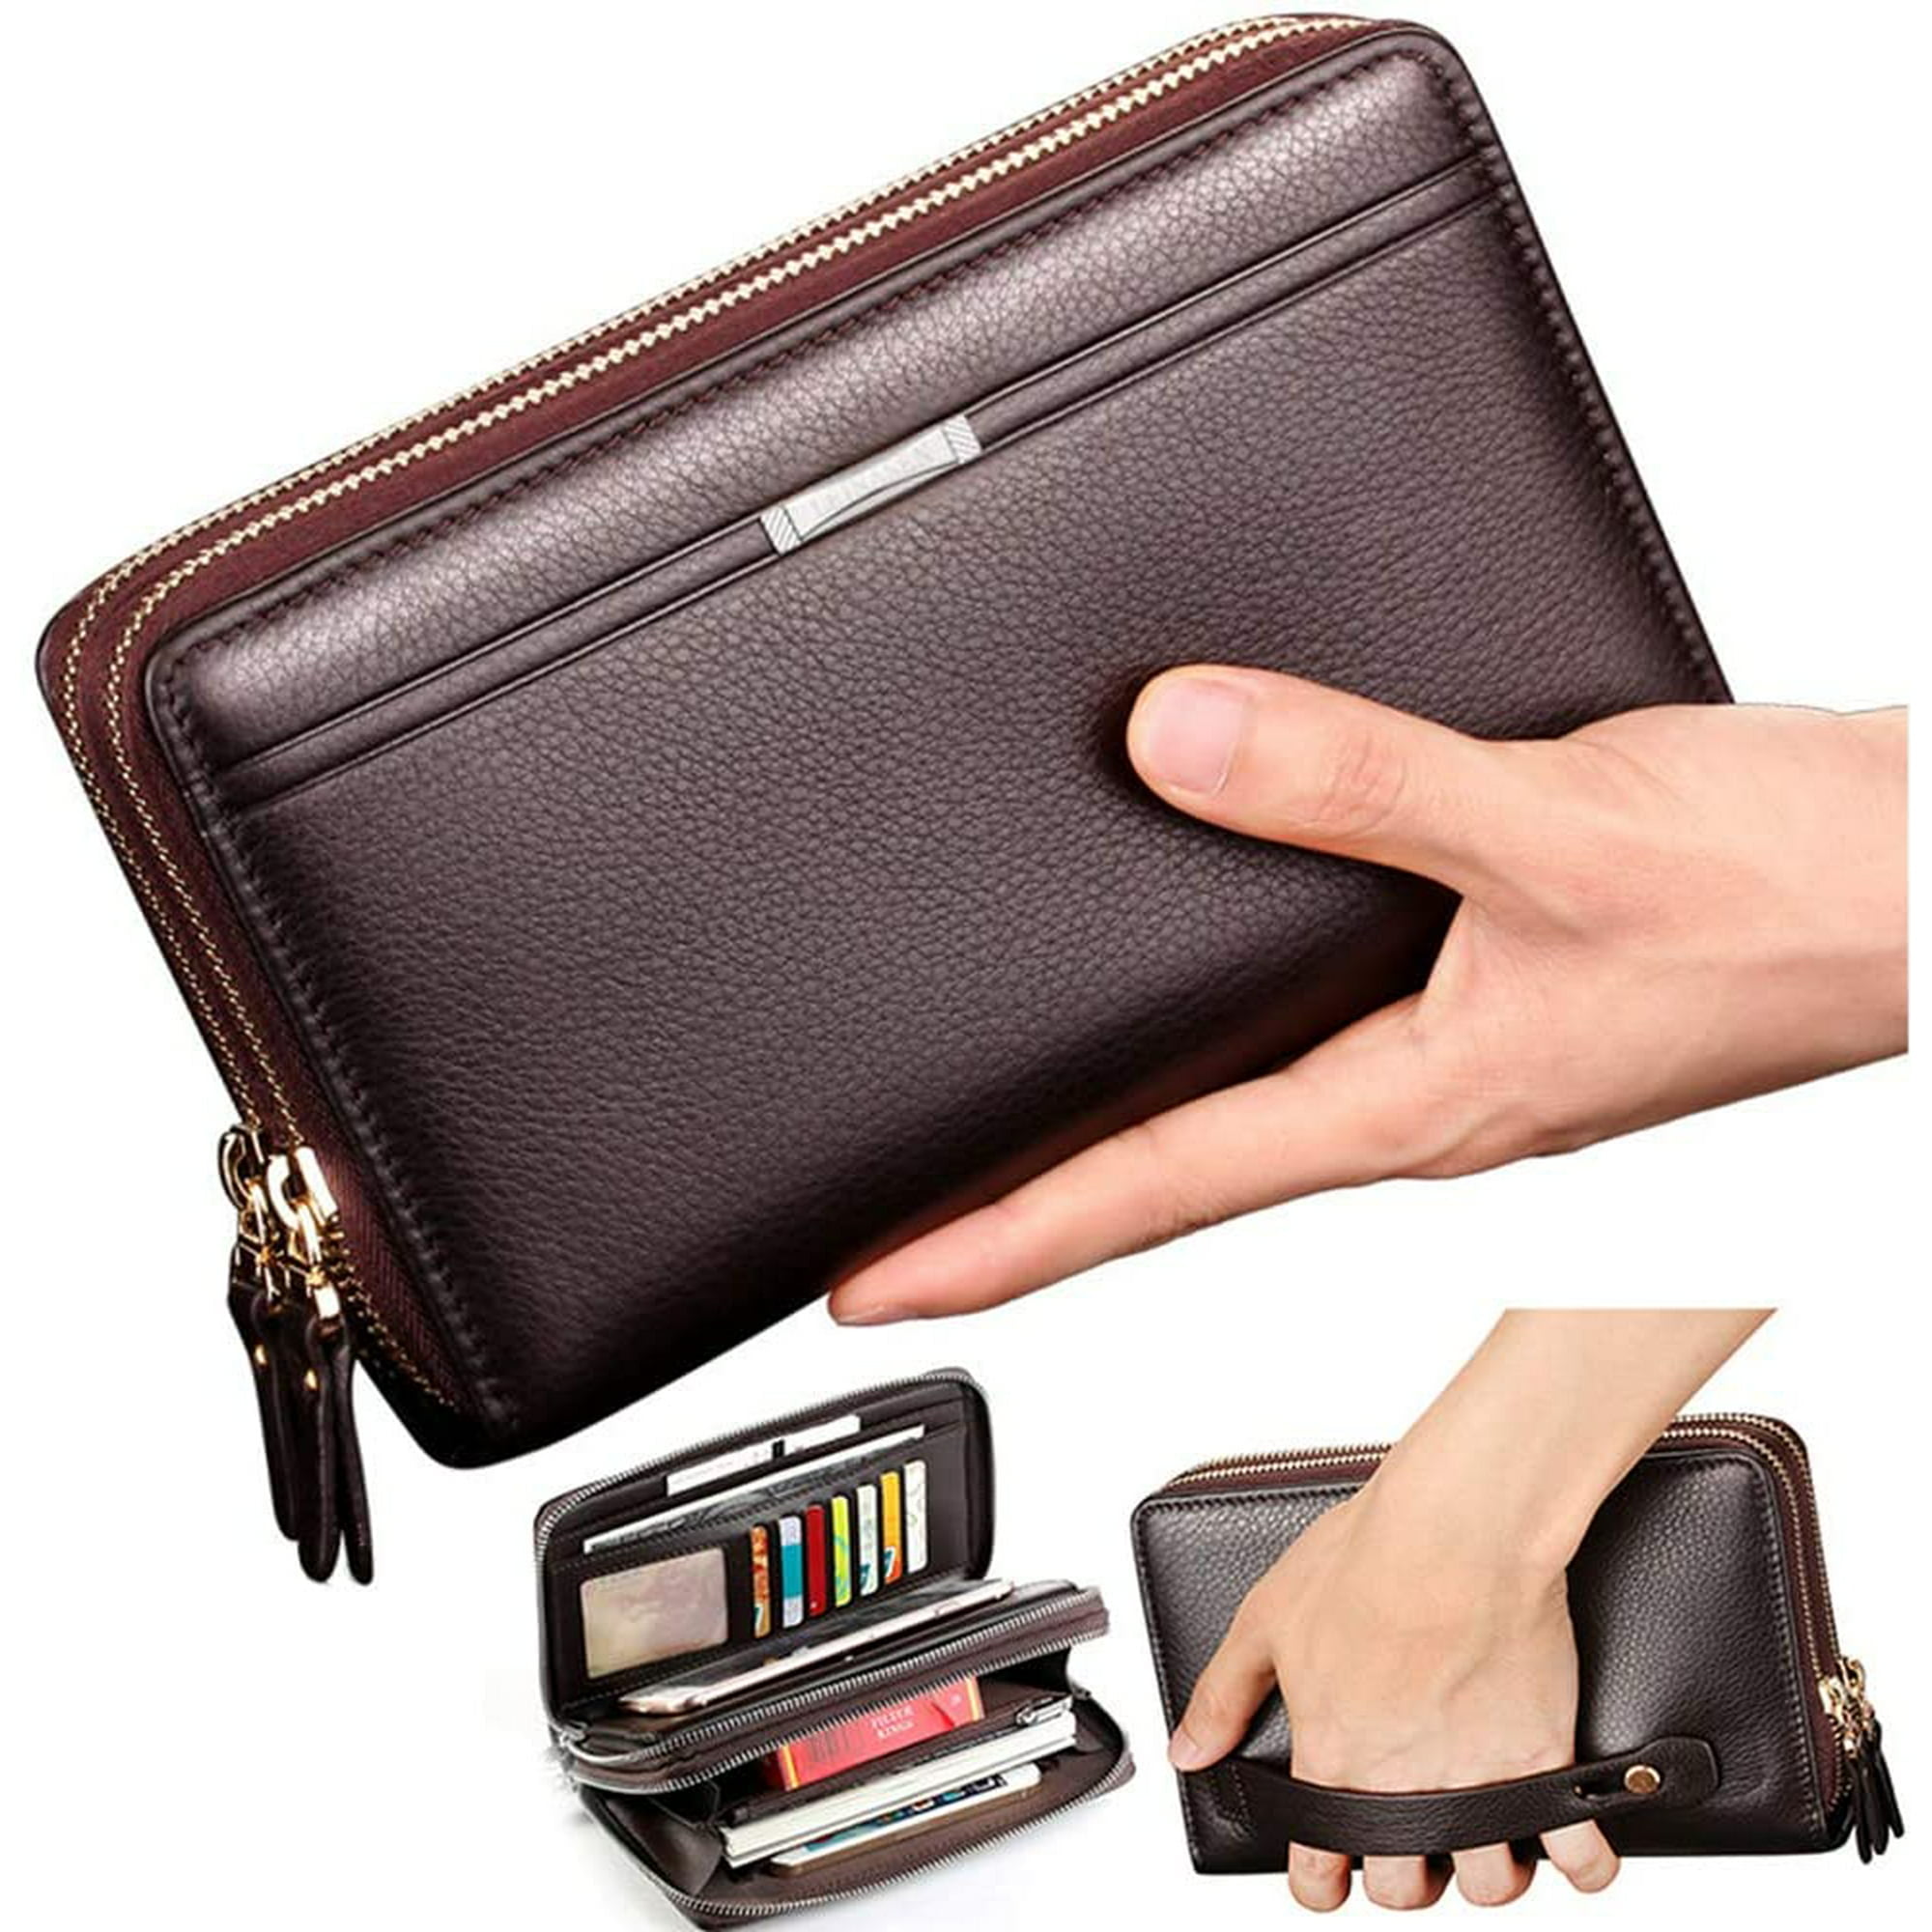 Men's Vintage Business Clutch Wallet With Large Capacity, Simple Fashion  Purse & Wrist Bag Christmas Gift For Men Men Clutch Bag Handbag Wristlet Bag  Holiday Essentials For Travel Fall Stuff Anti-theft Portable